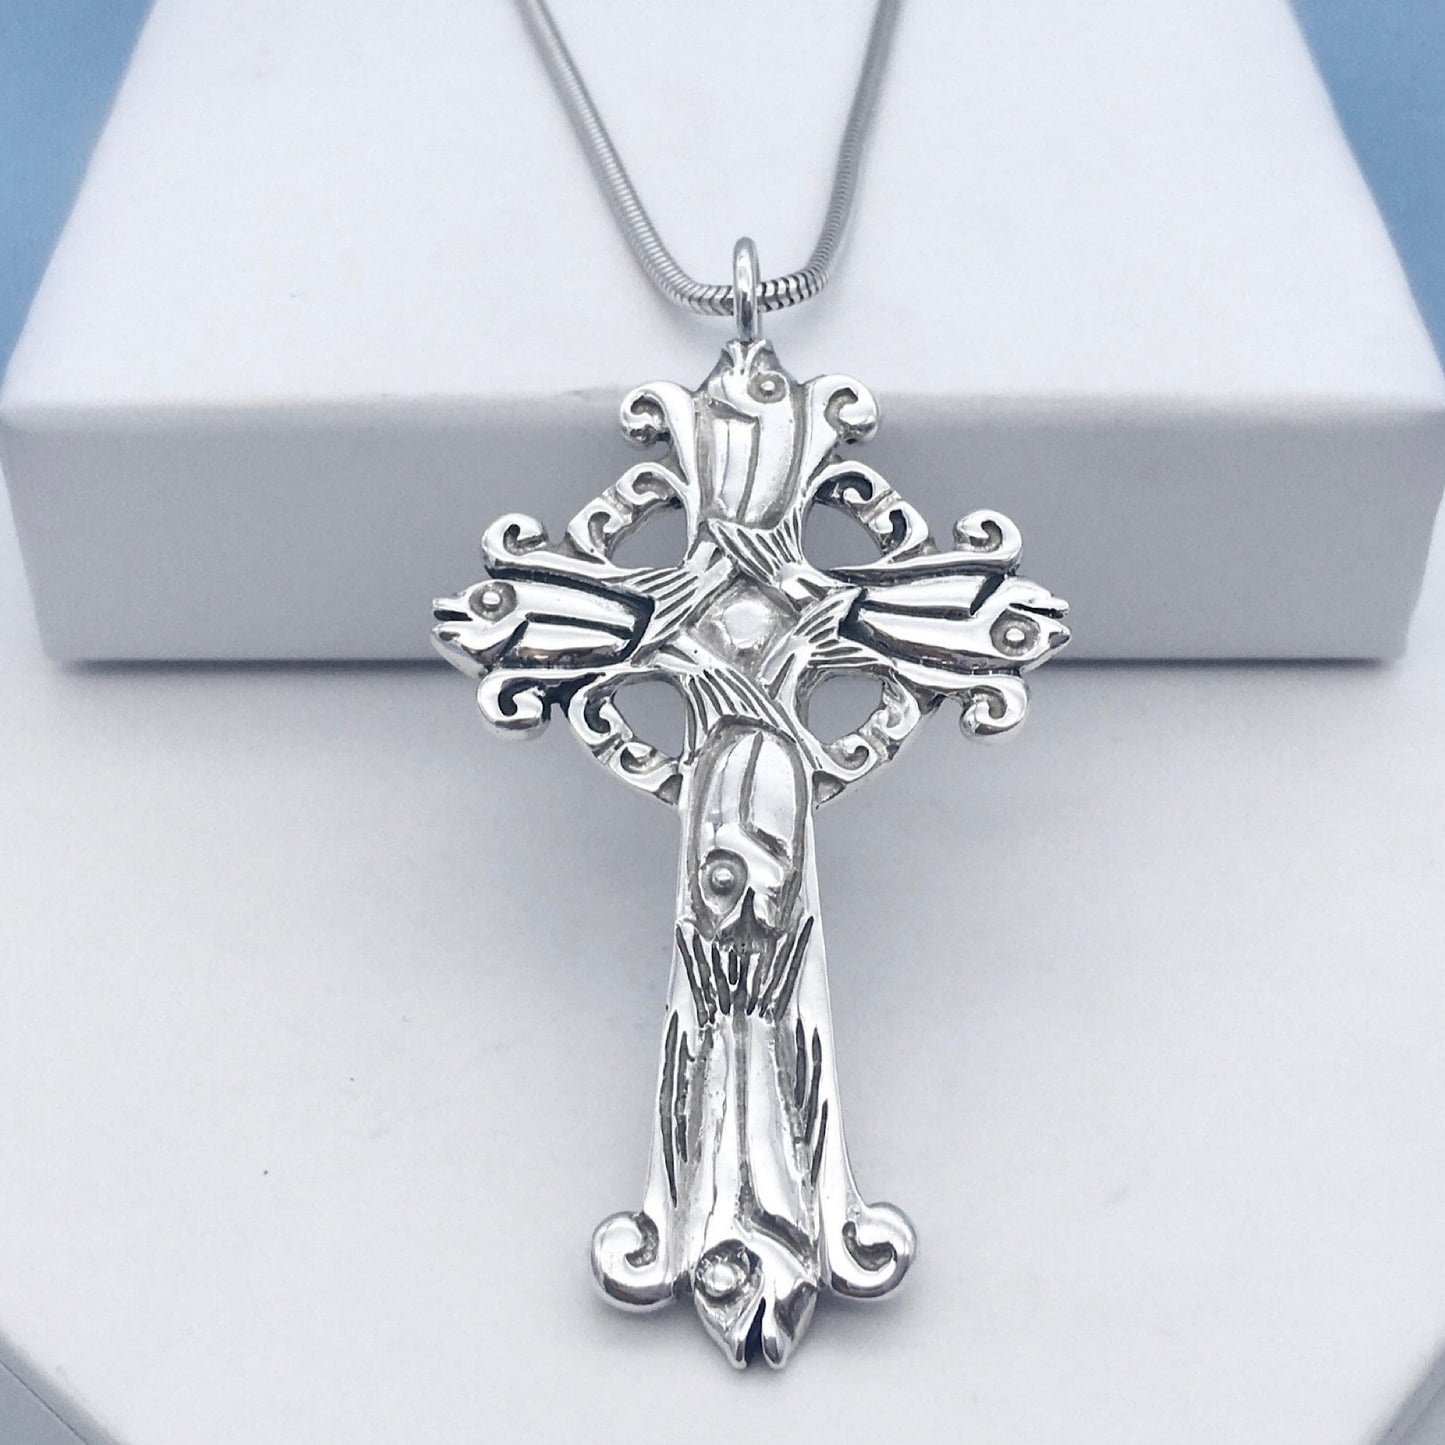 Silver Cross Pendant 2 Sided Crucifix Unusual Jewelry Religious Bridal Gifts Baptism Gift Idea Unique Silver Cross Pendant Fish Supper Cross